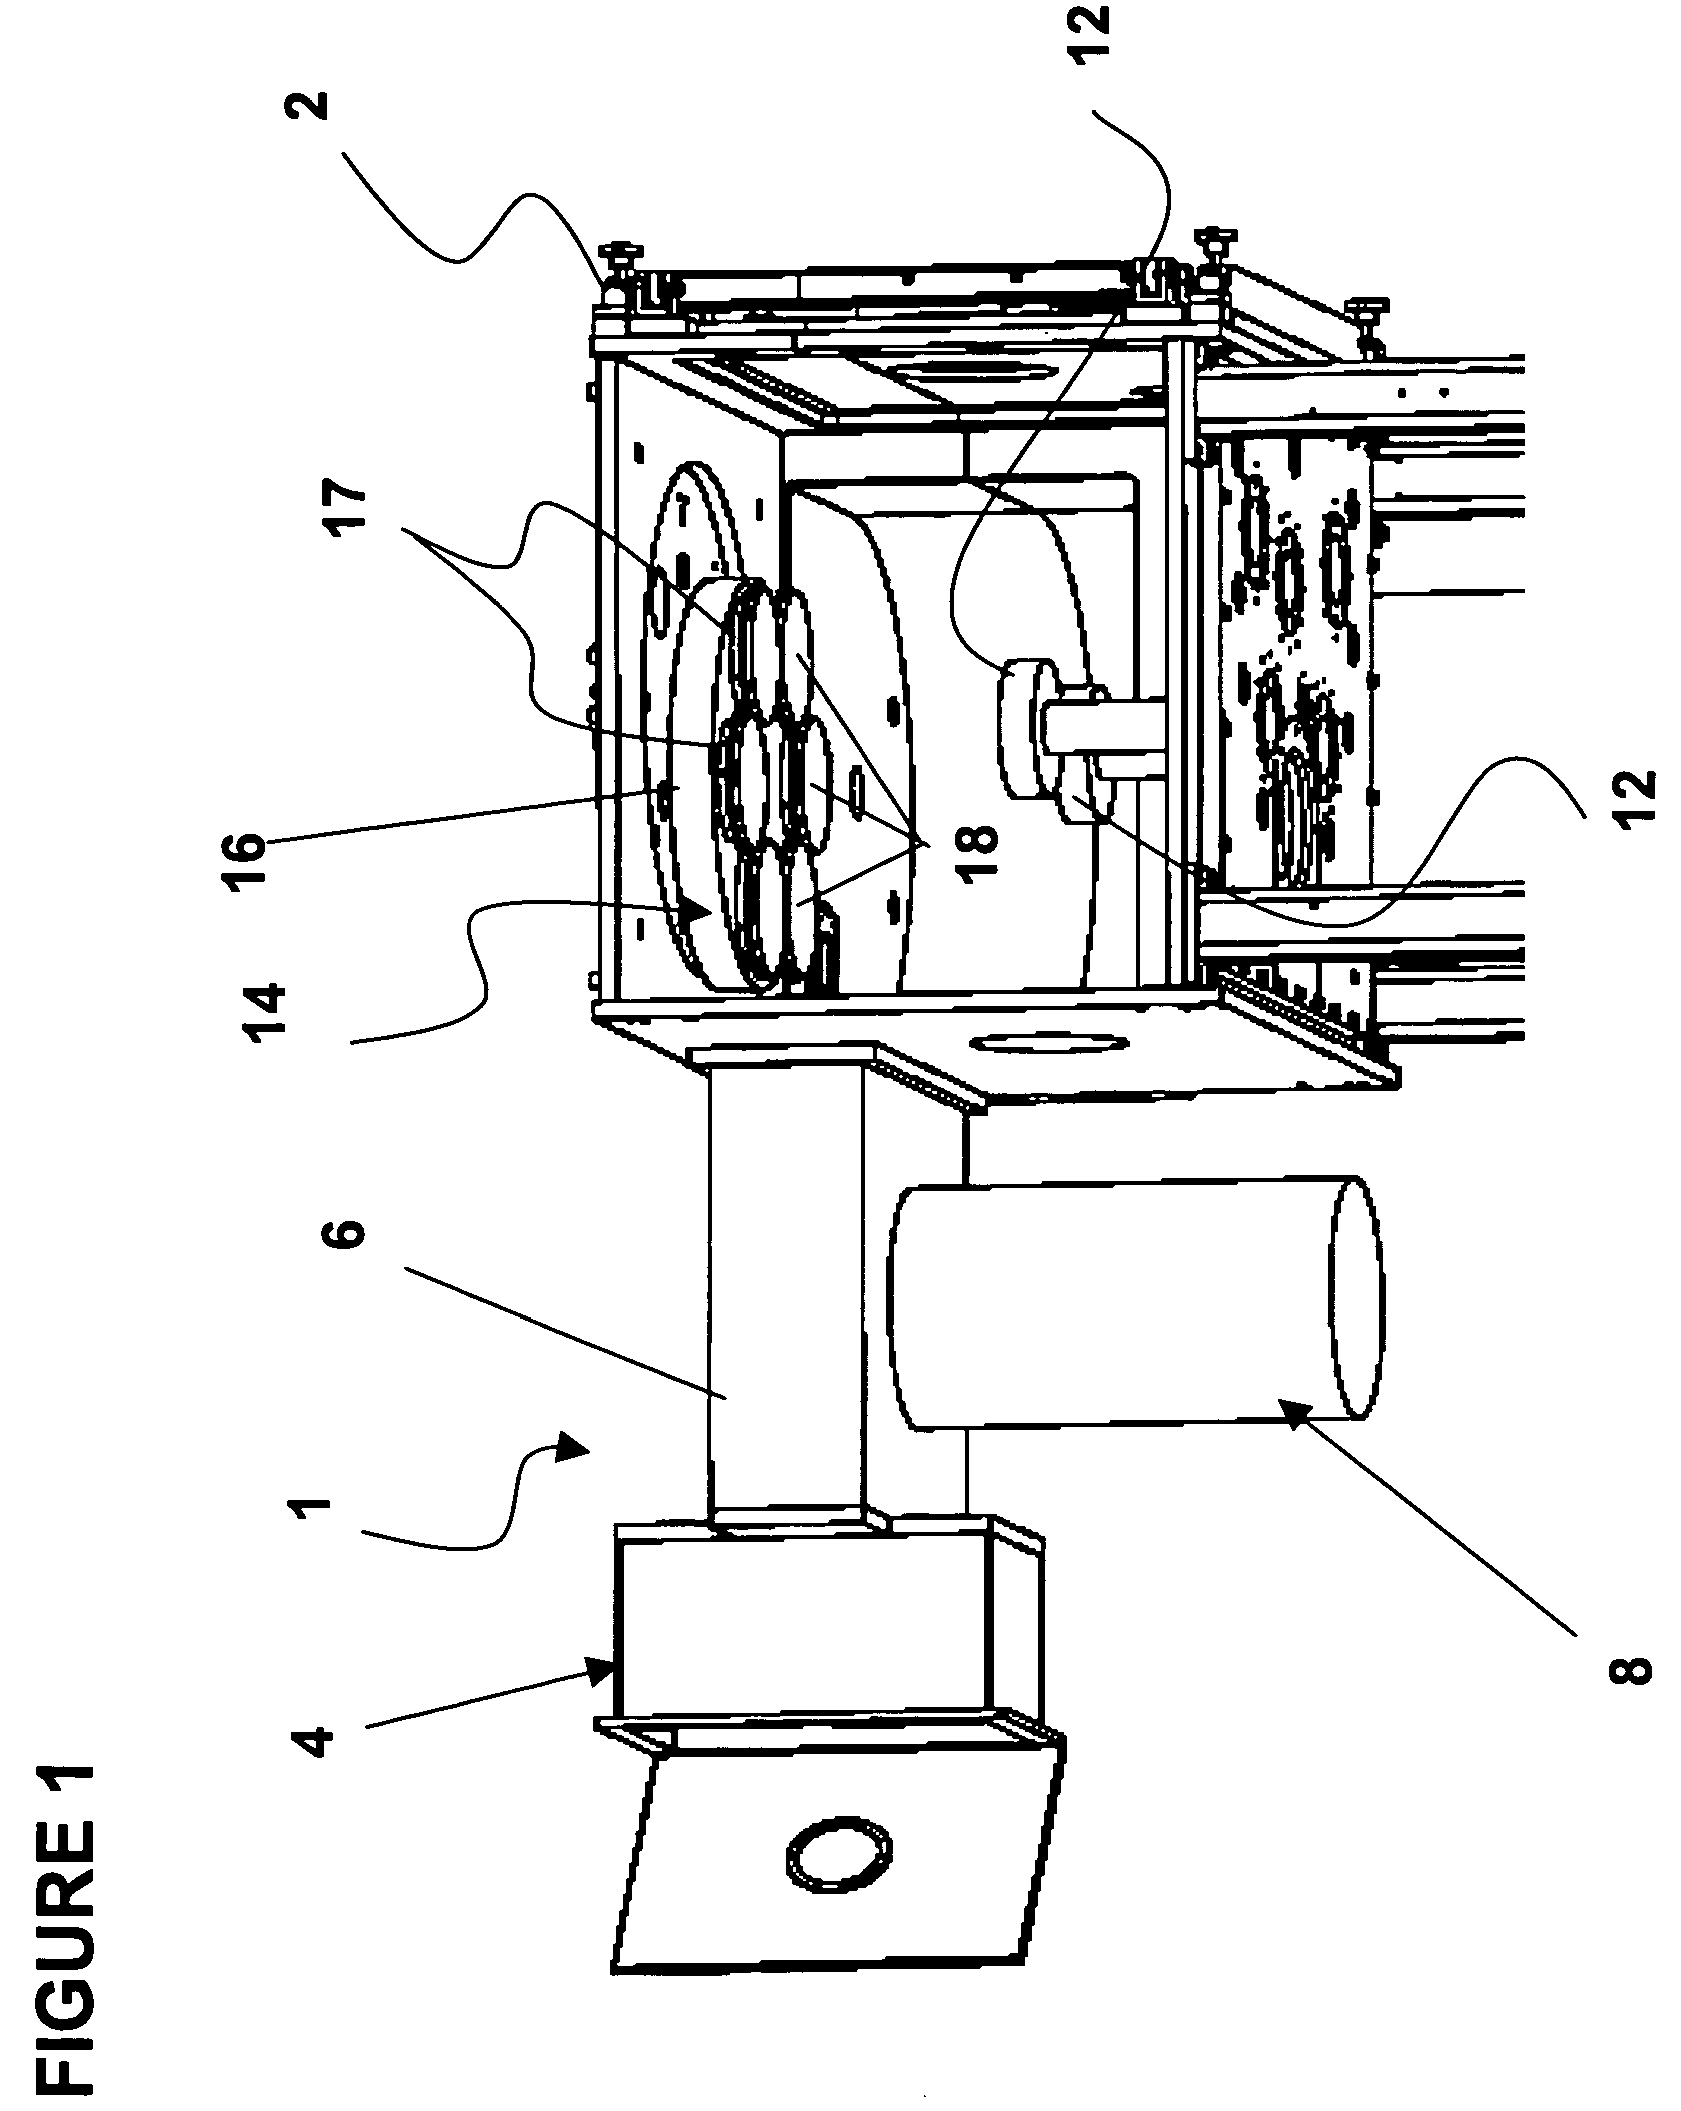 Substrate holder for a vapour deposition system